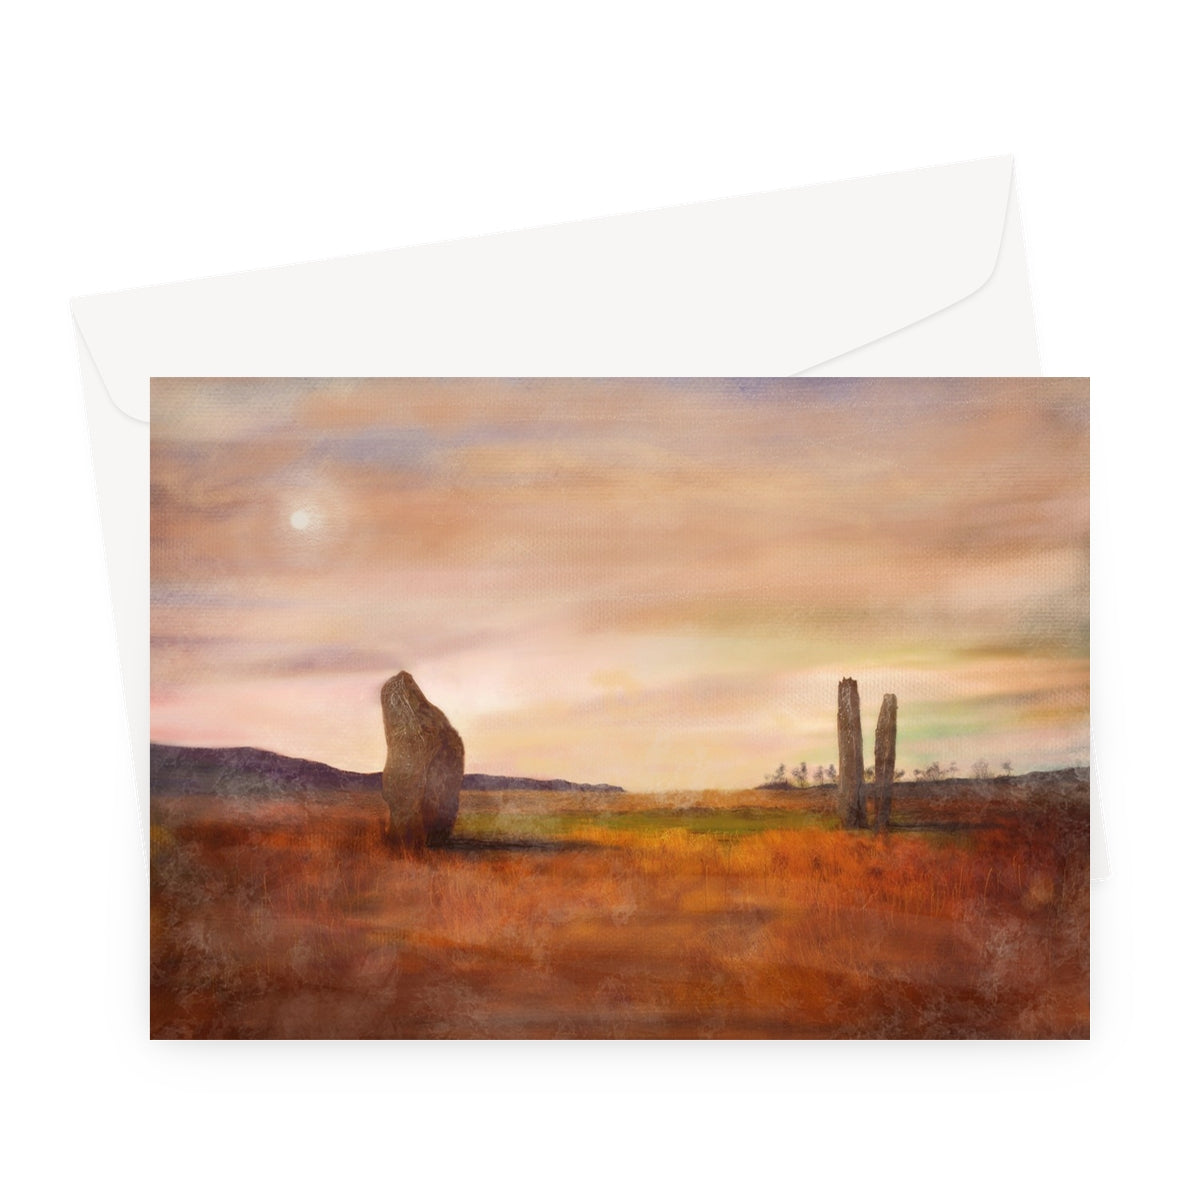 Machrie Moor Arran Art Gifts Greeting Card-Greetings Cards-Arran Art Gallery-A5 Landscape-1 Card-Paintings, Prints, Homeware, Art Gifts From Scotland By Scottish Artist Kevin Hunter